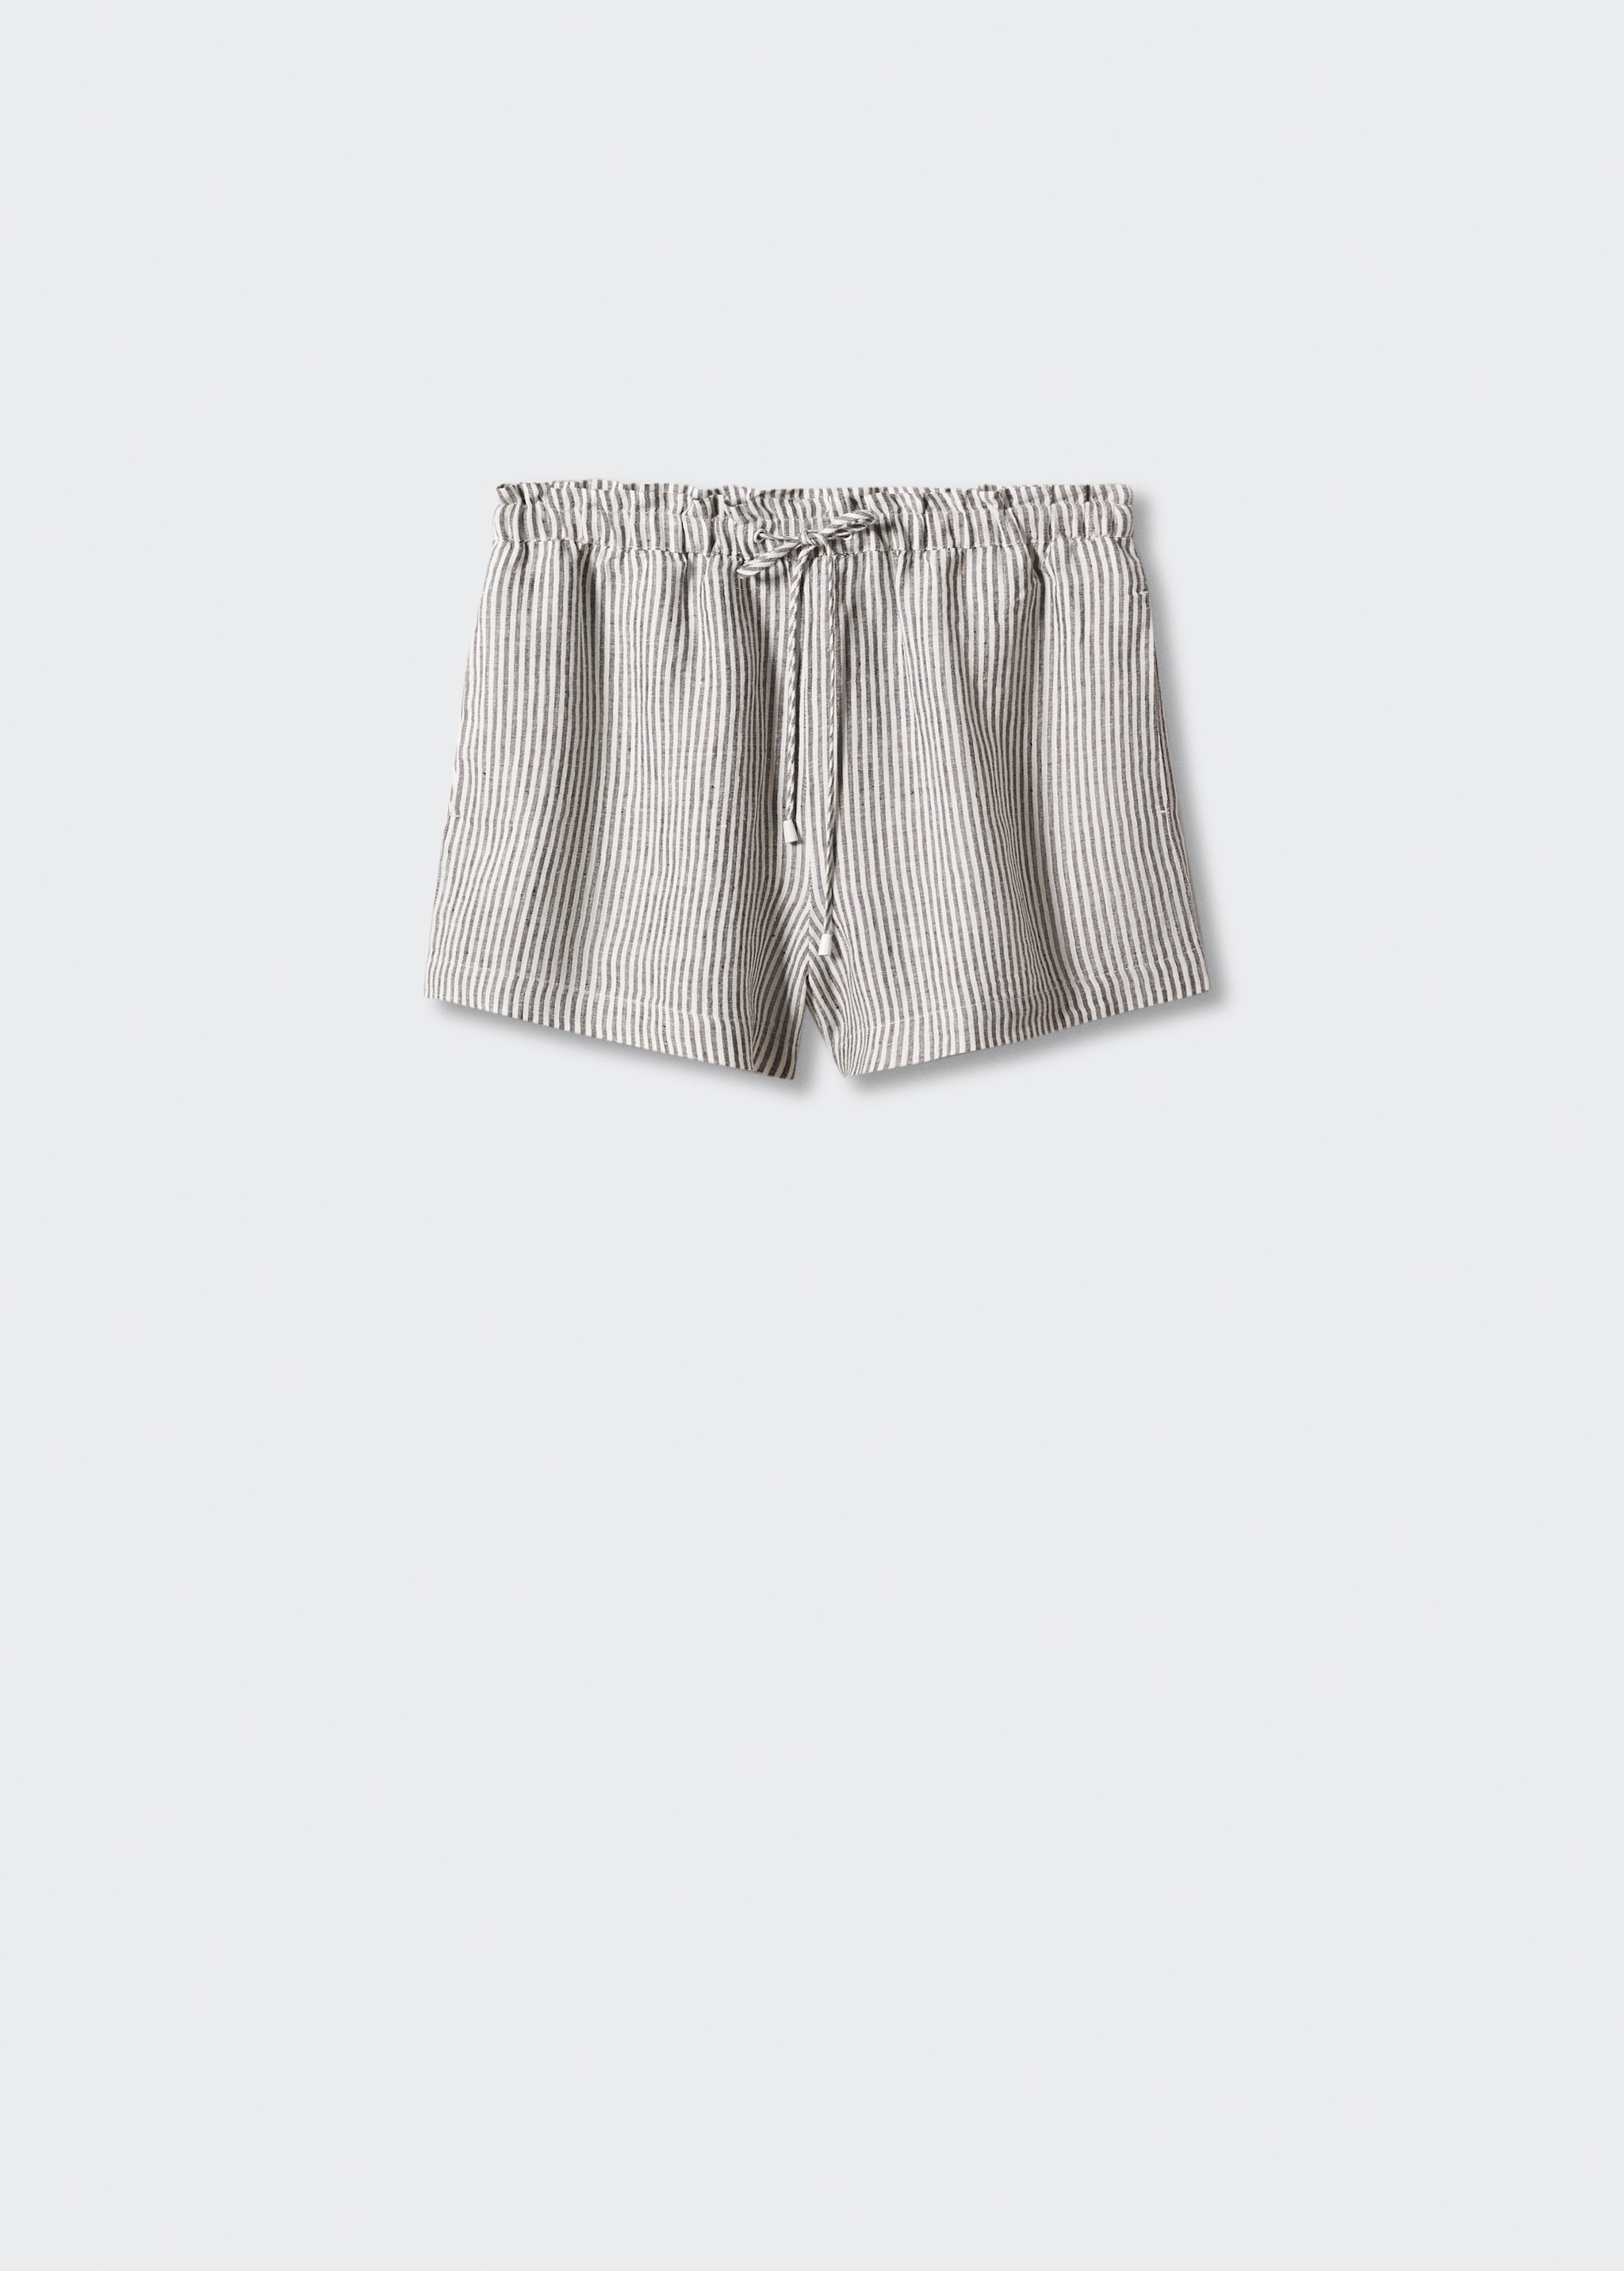 Linen shorts with drawstring - Article without model